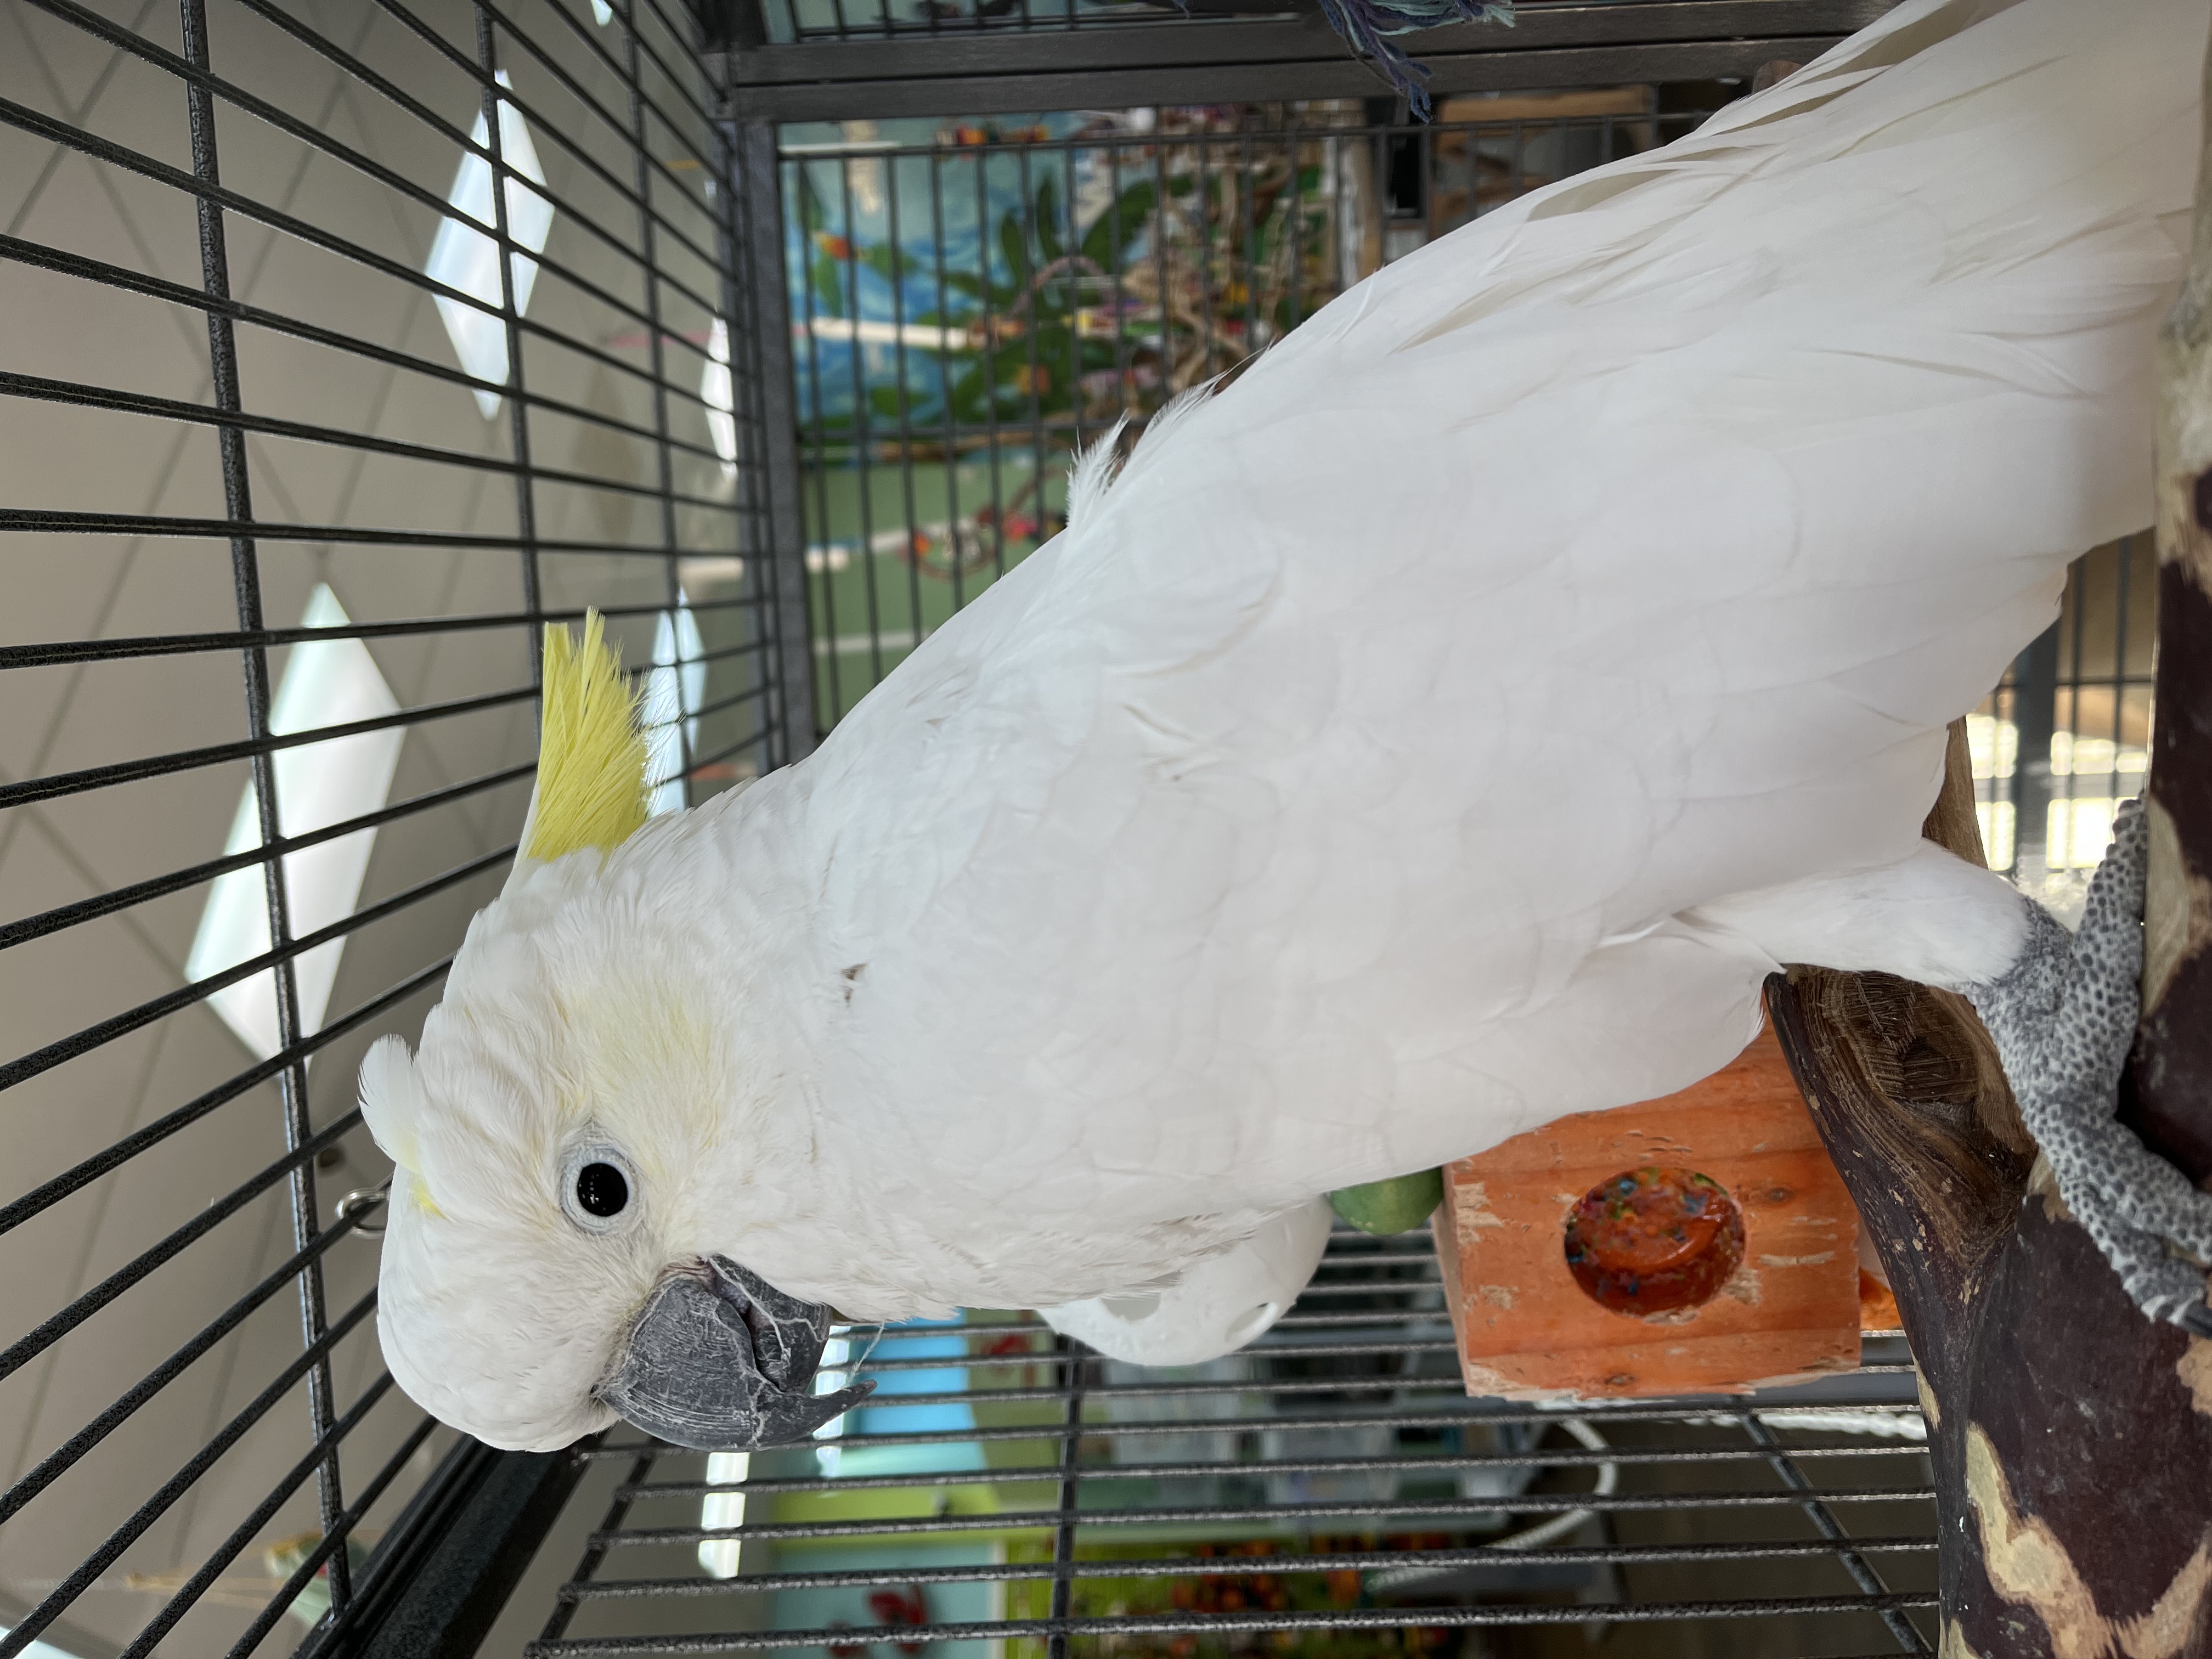 Orlando the Greater Sulfur Crested Cockatoo